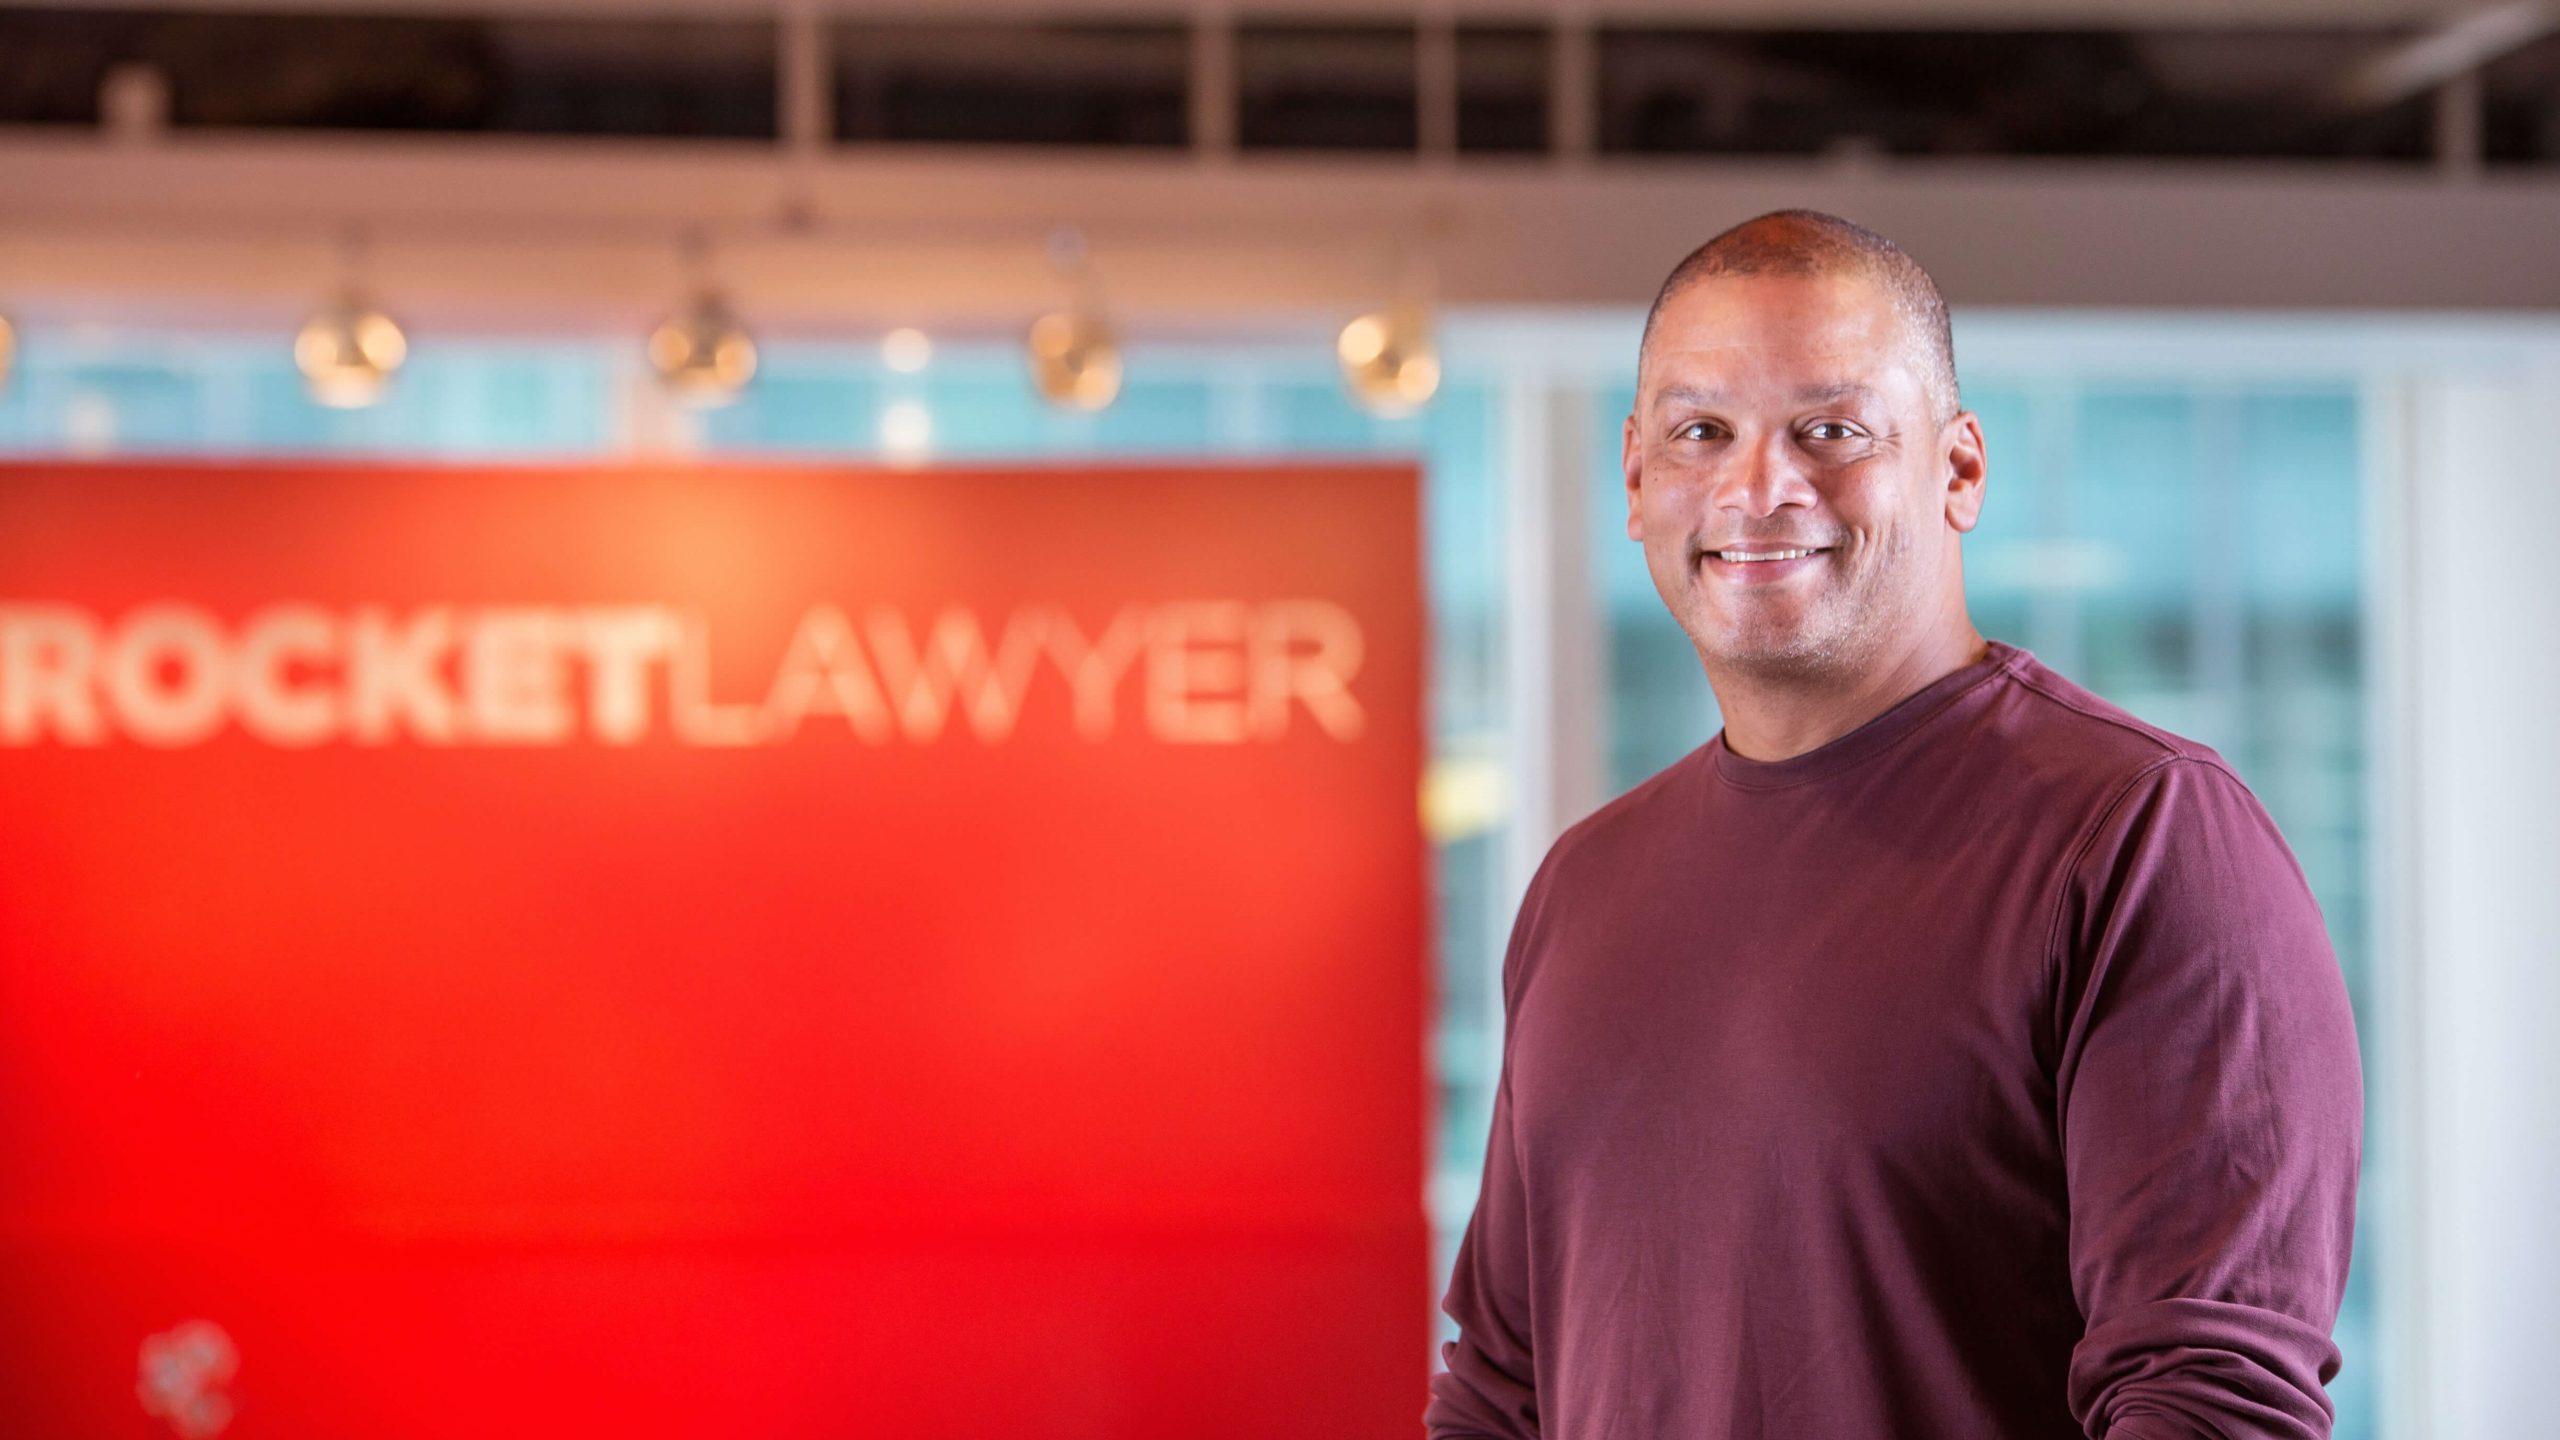 Rocket Lawyer Raises $223 Million To Meet Growing Demand For Its Services